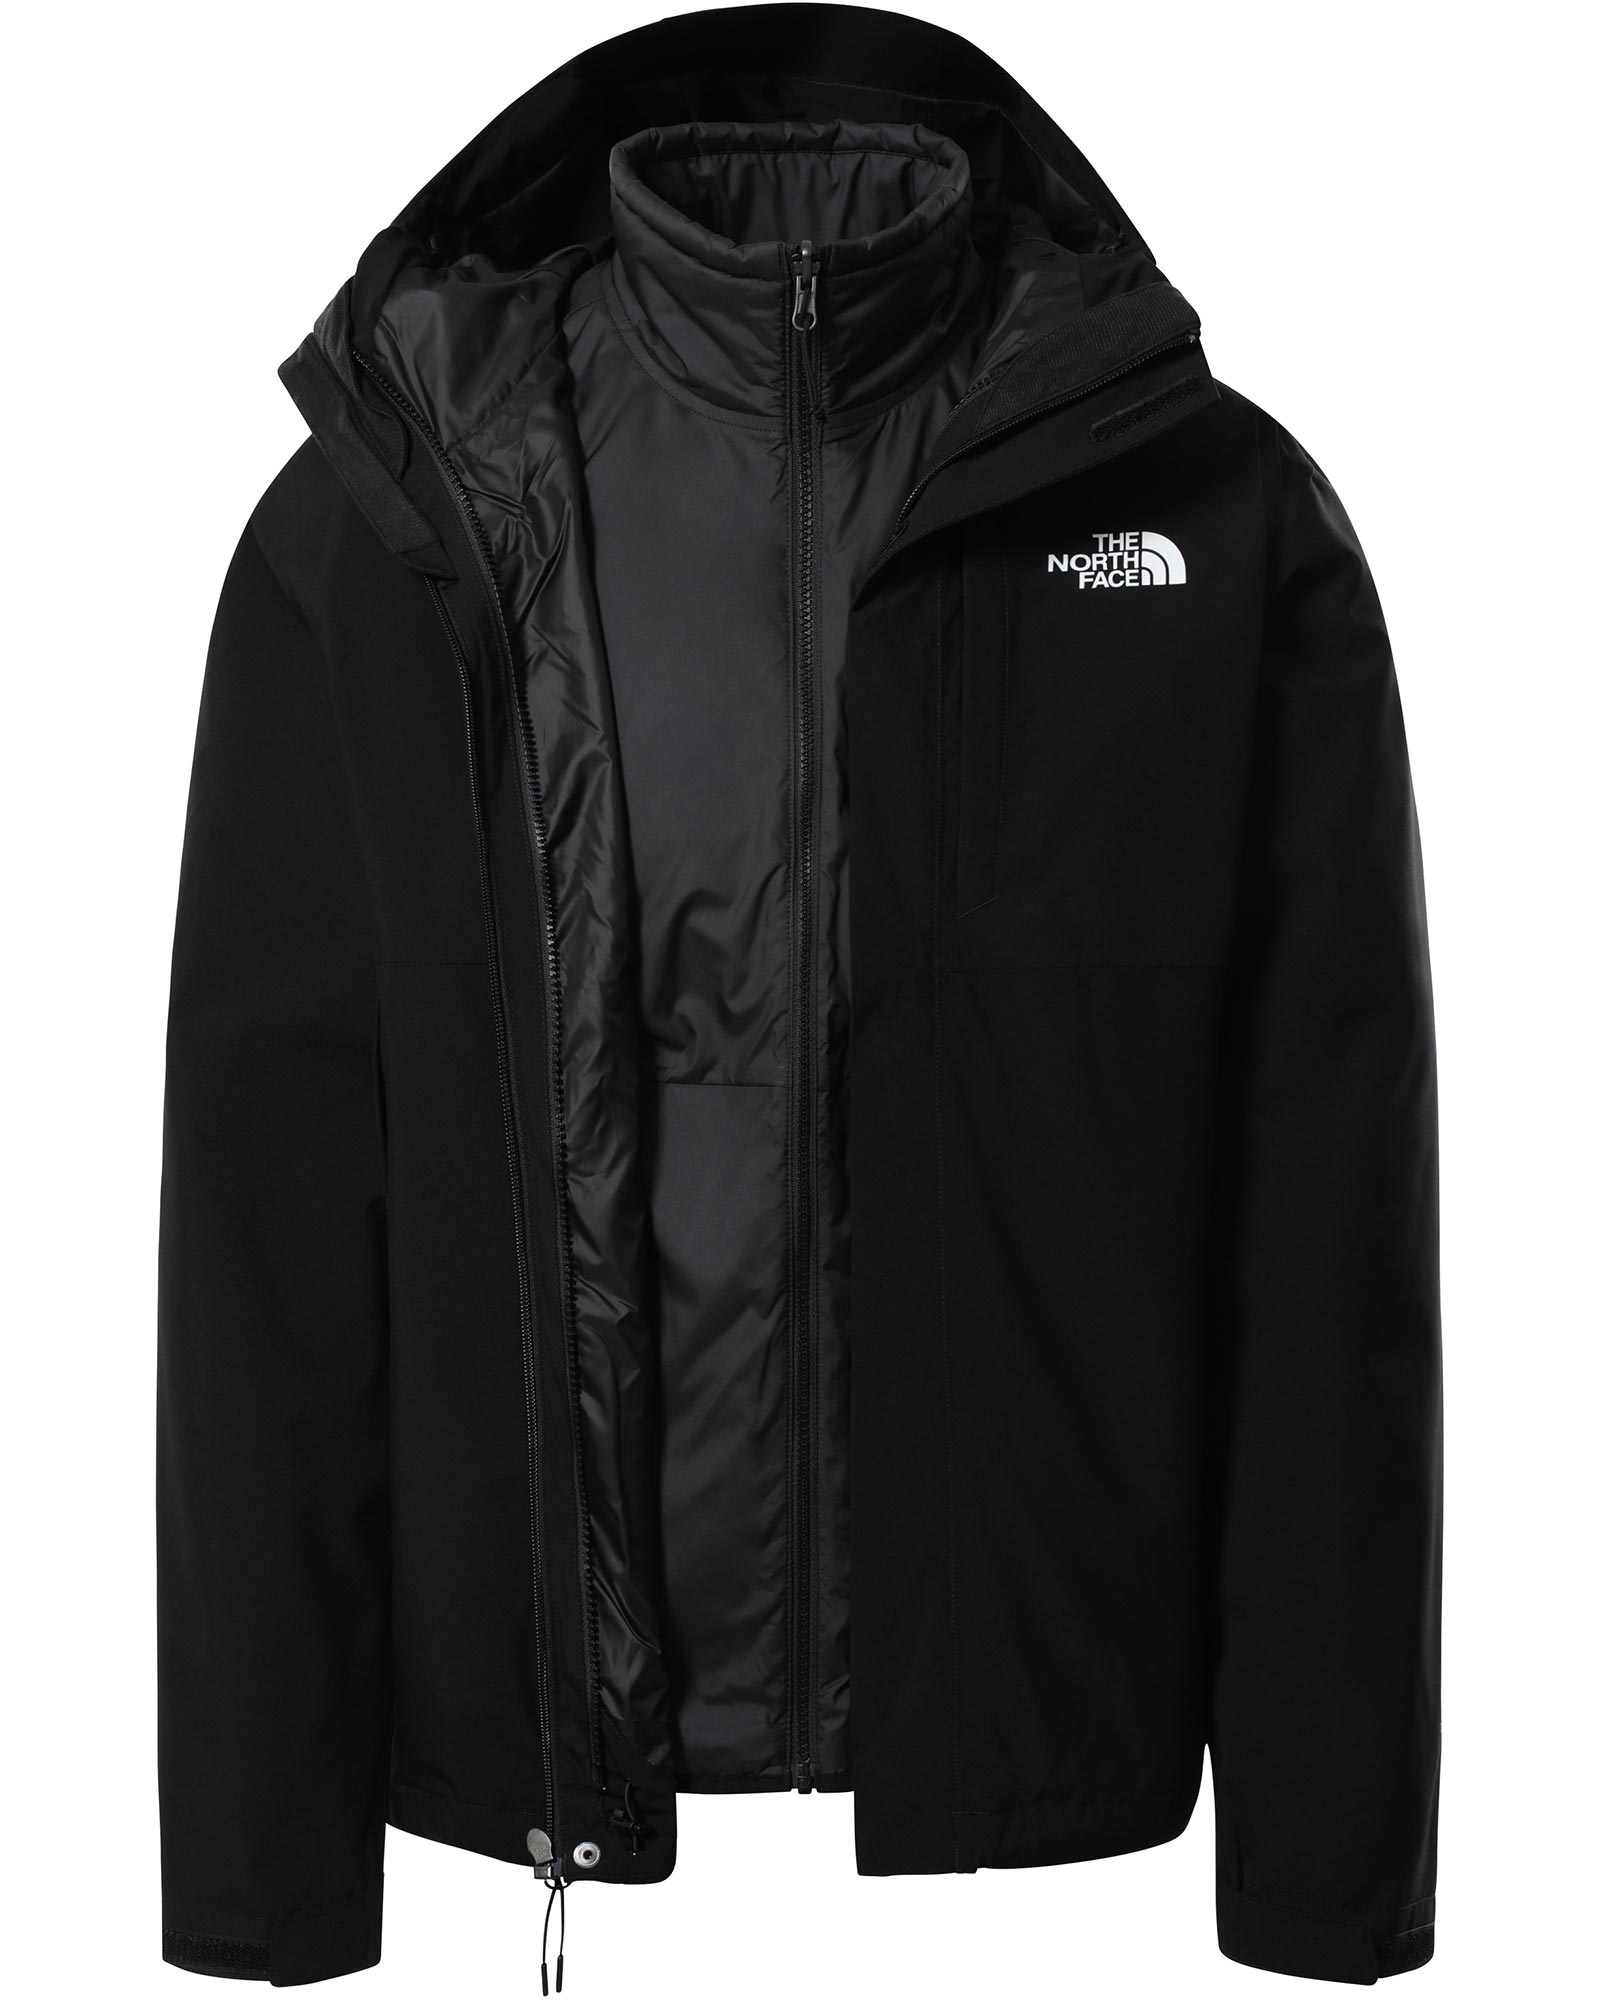 Product image of The North Face Carto Men's Triclimate Jacket